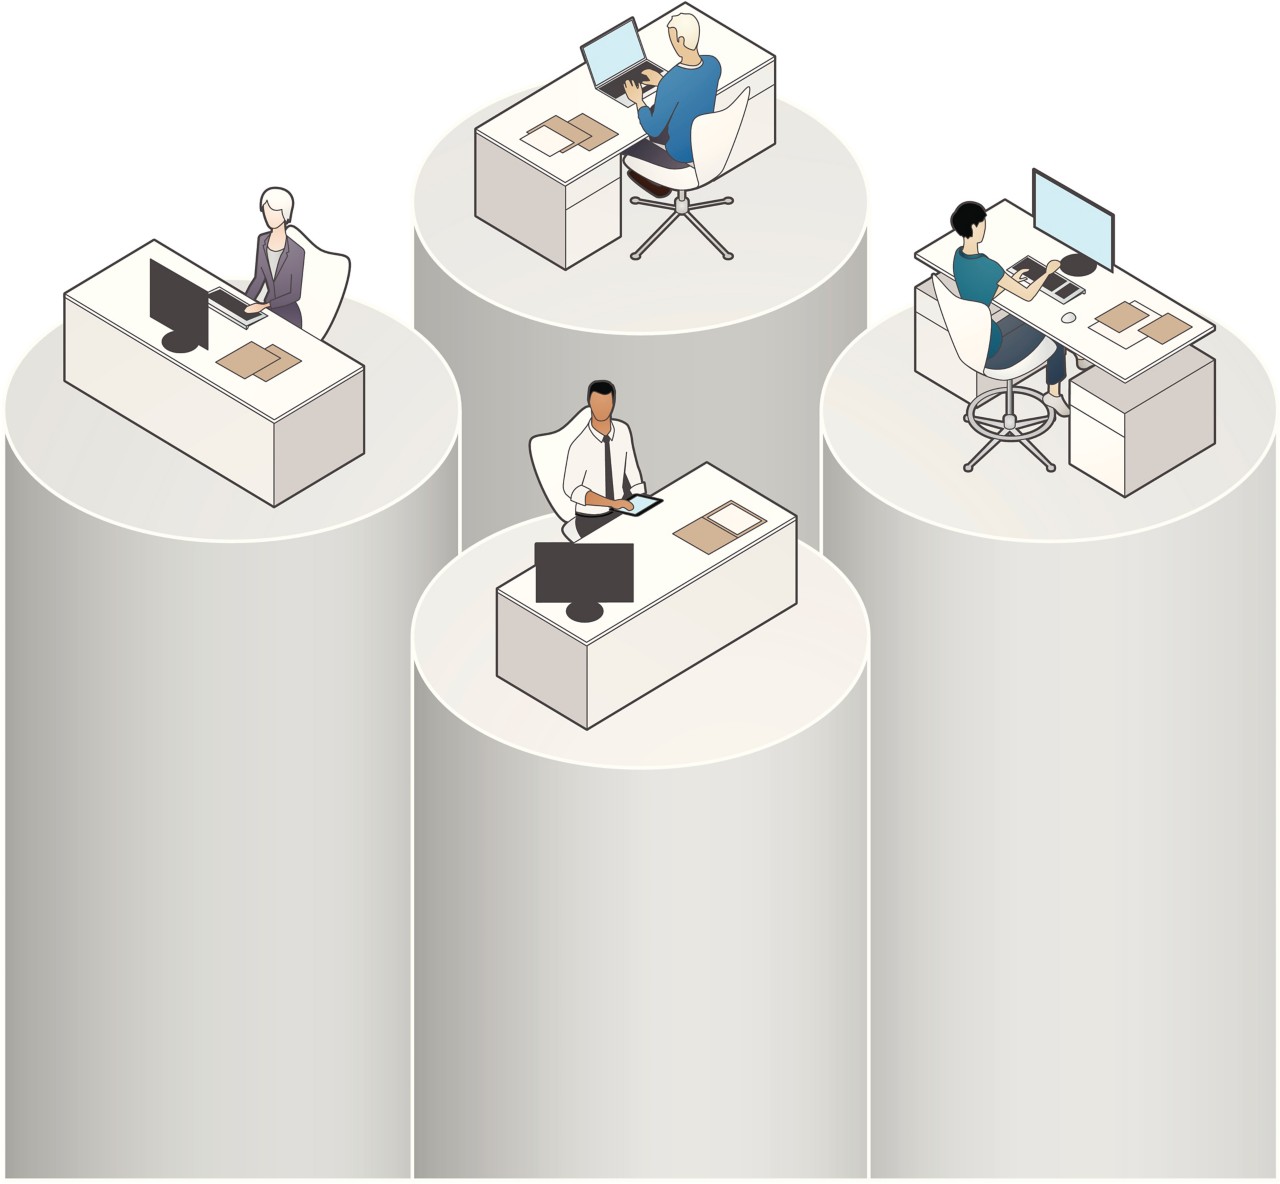 Getty Images #165954847 showing the concept illustration of the Silo Effect, where people in different business groups fail to share information with each other.